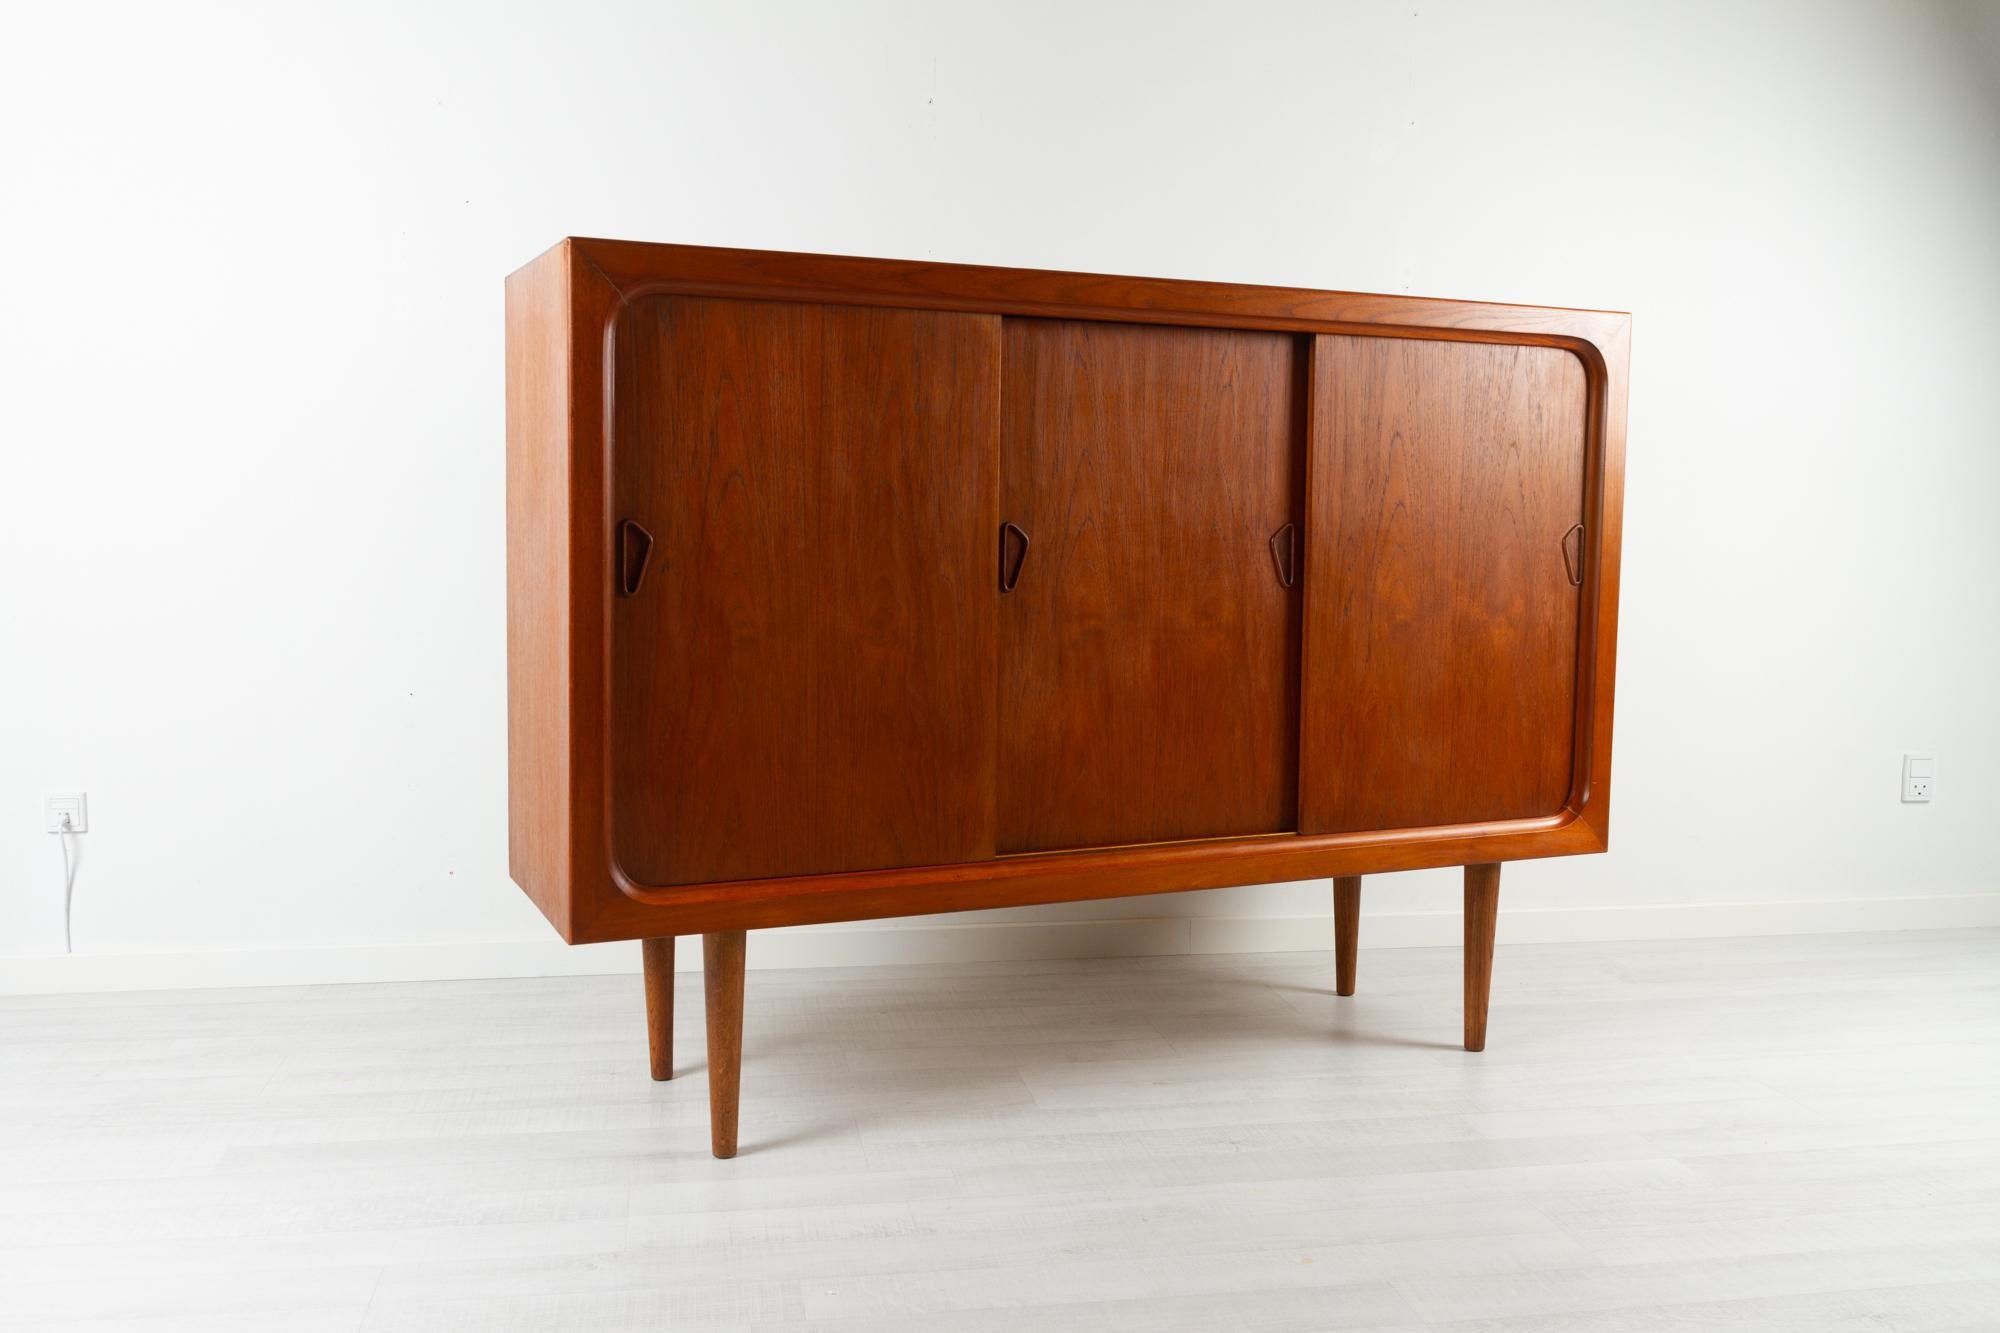 Vintage Danish teak sideboard 1960s
Mid-century modern highboard in teak with three sliding doors made in Denmark in the 1960s. Very spacious large cabinet with two height adjustable shelves. Triangular door handles in solid teak. Also features a